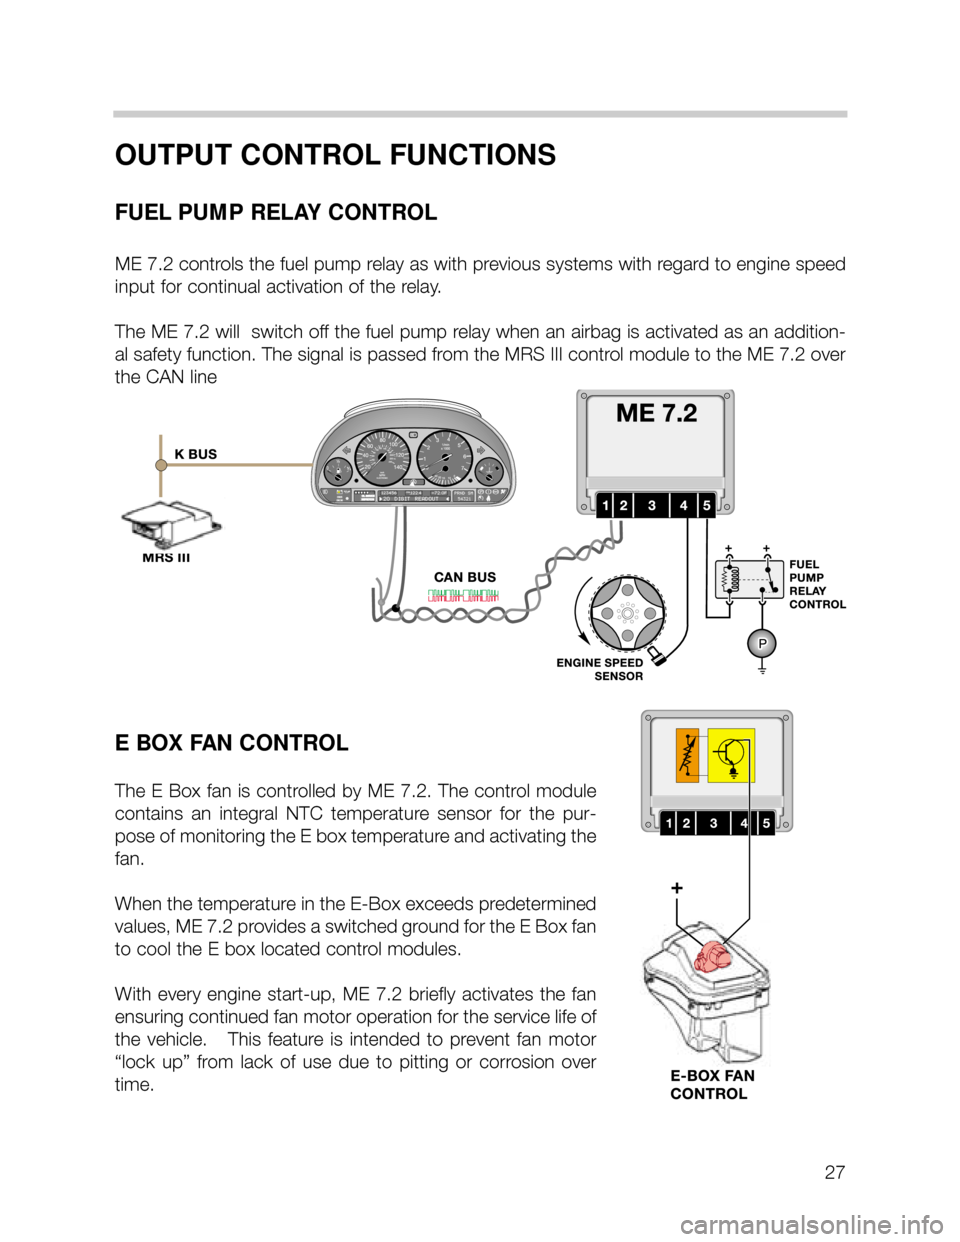 BMW X5 2005 E53 M62TU Engine Workshop Manual 27
OUTPUT CONTROL FUNCTIONS
FUEL PUMP RELAY CONTROL
ME 7.2 controls the fuel pump relay as with previous systems with regard to engine speed
input for continual activation of the relay.  
The ME 7.2 w